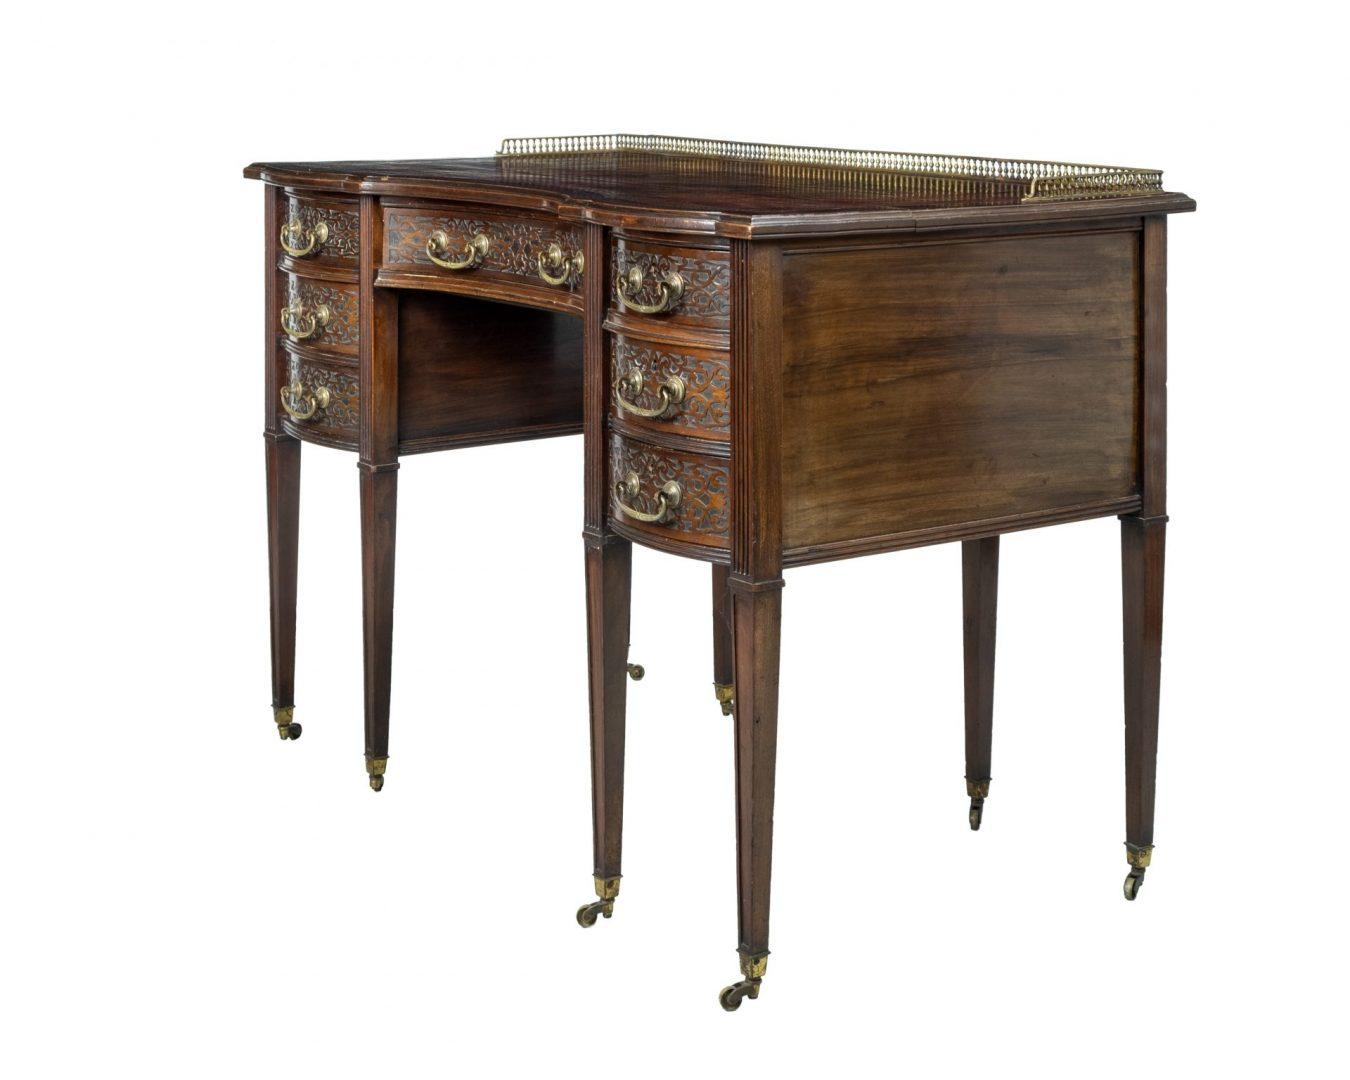 An Edwards & Roberts mahogany serpentine front ladies desk with leather inset top and cast brass gallery (a/f), with single frieze drawer and six flanking short drawers featuring Cope & Collinson locks and blind fretwork decoration, set on moulded